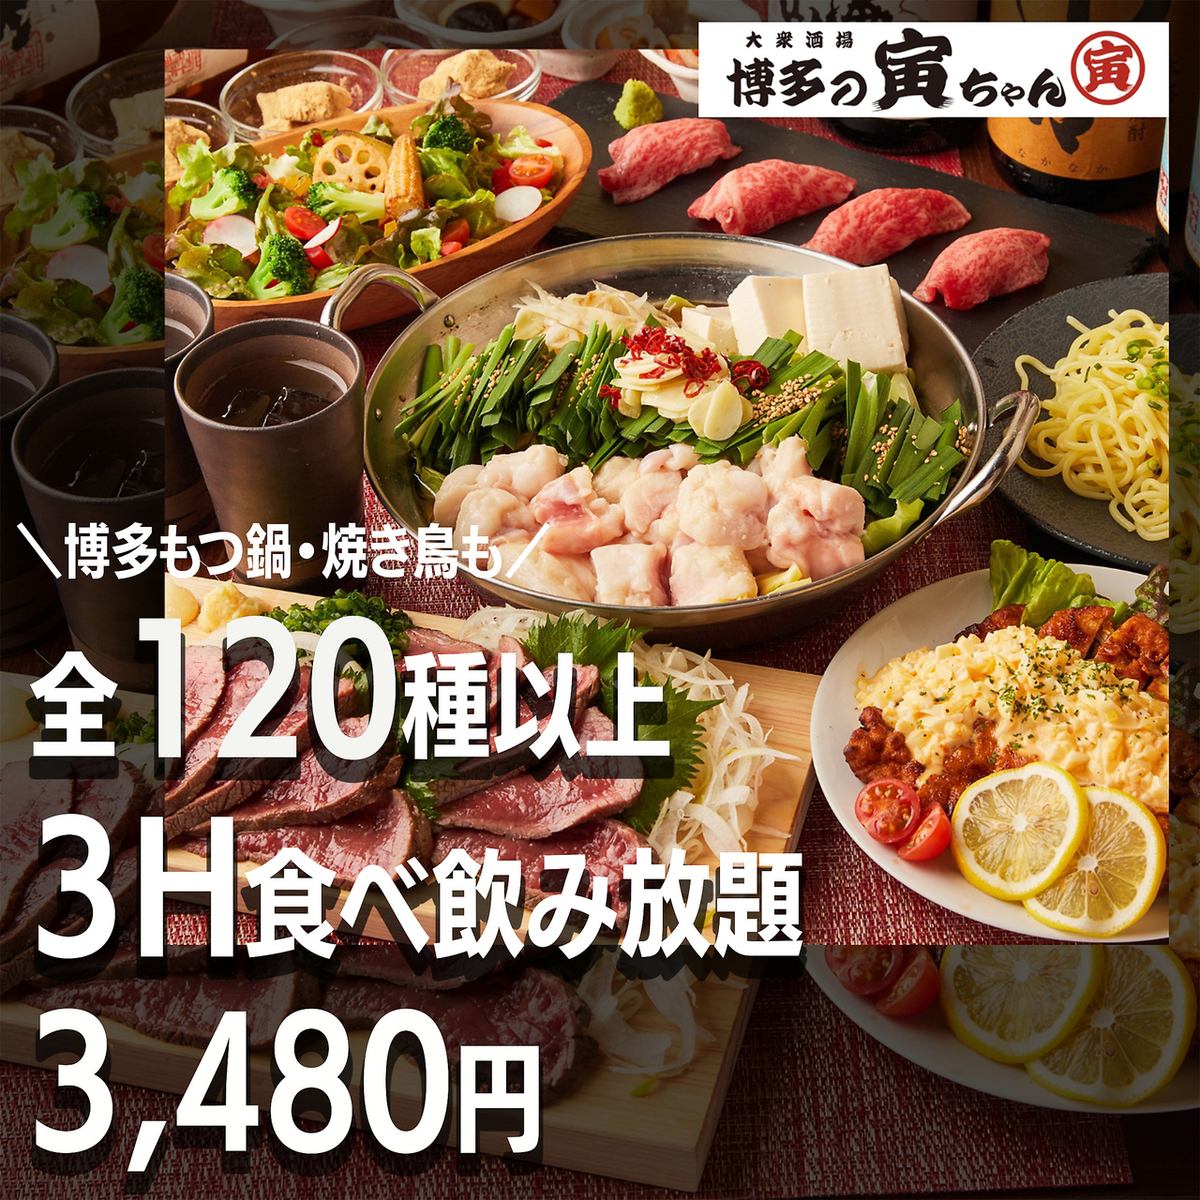 Just 3 minutes from Yokohama Station! A popular Hakata izakaya where you can enjoy authentic motsunabe and carefully selected yakitori all-you-can-eat is now open!